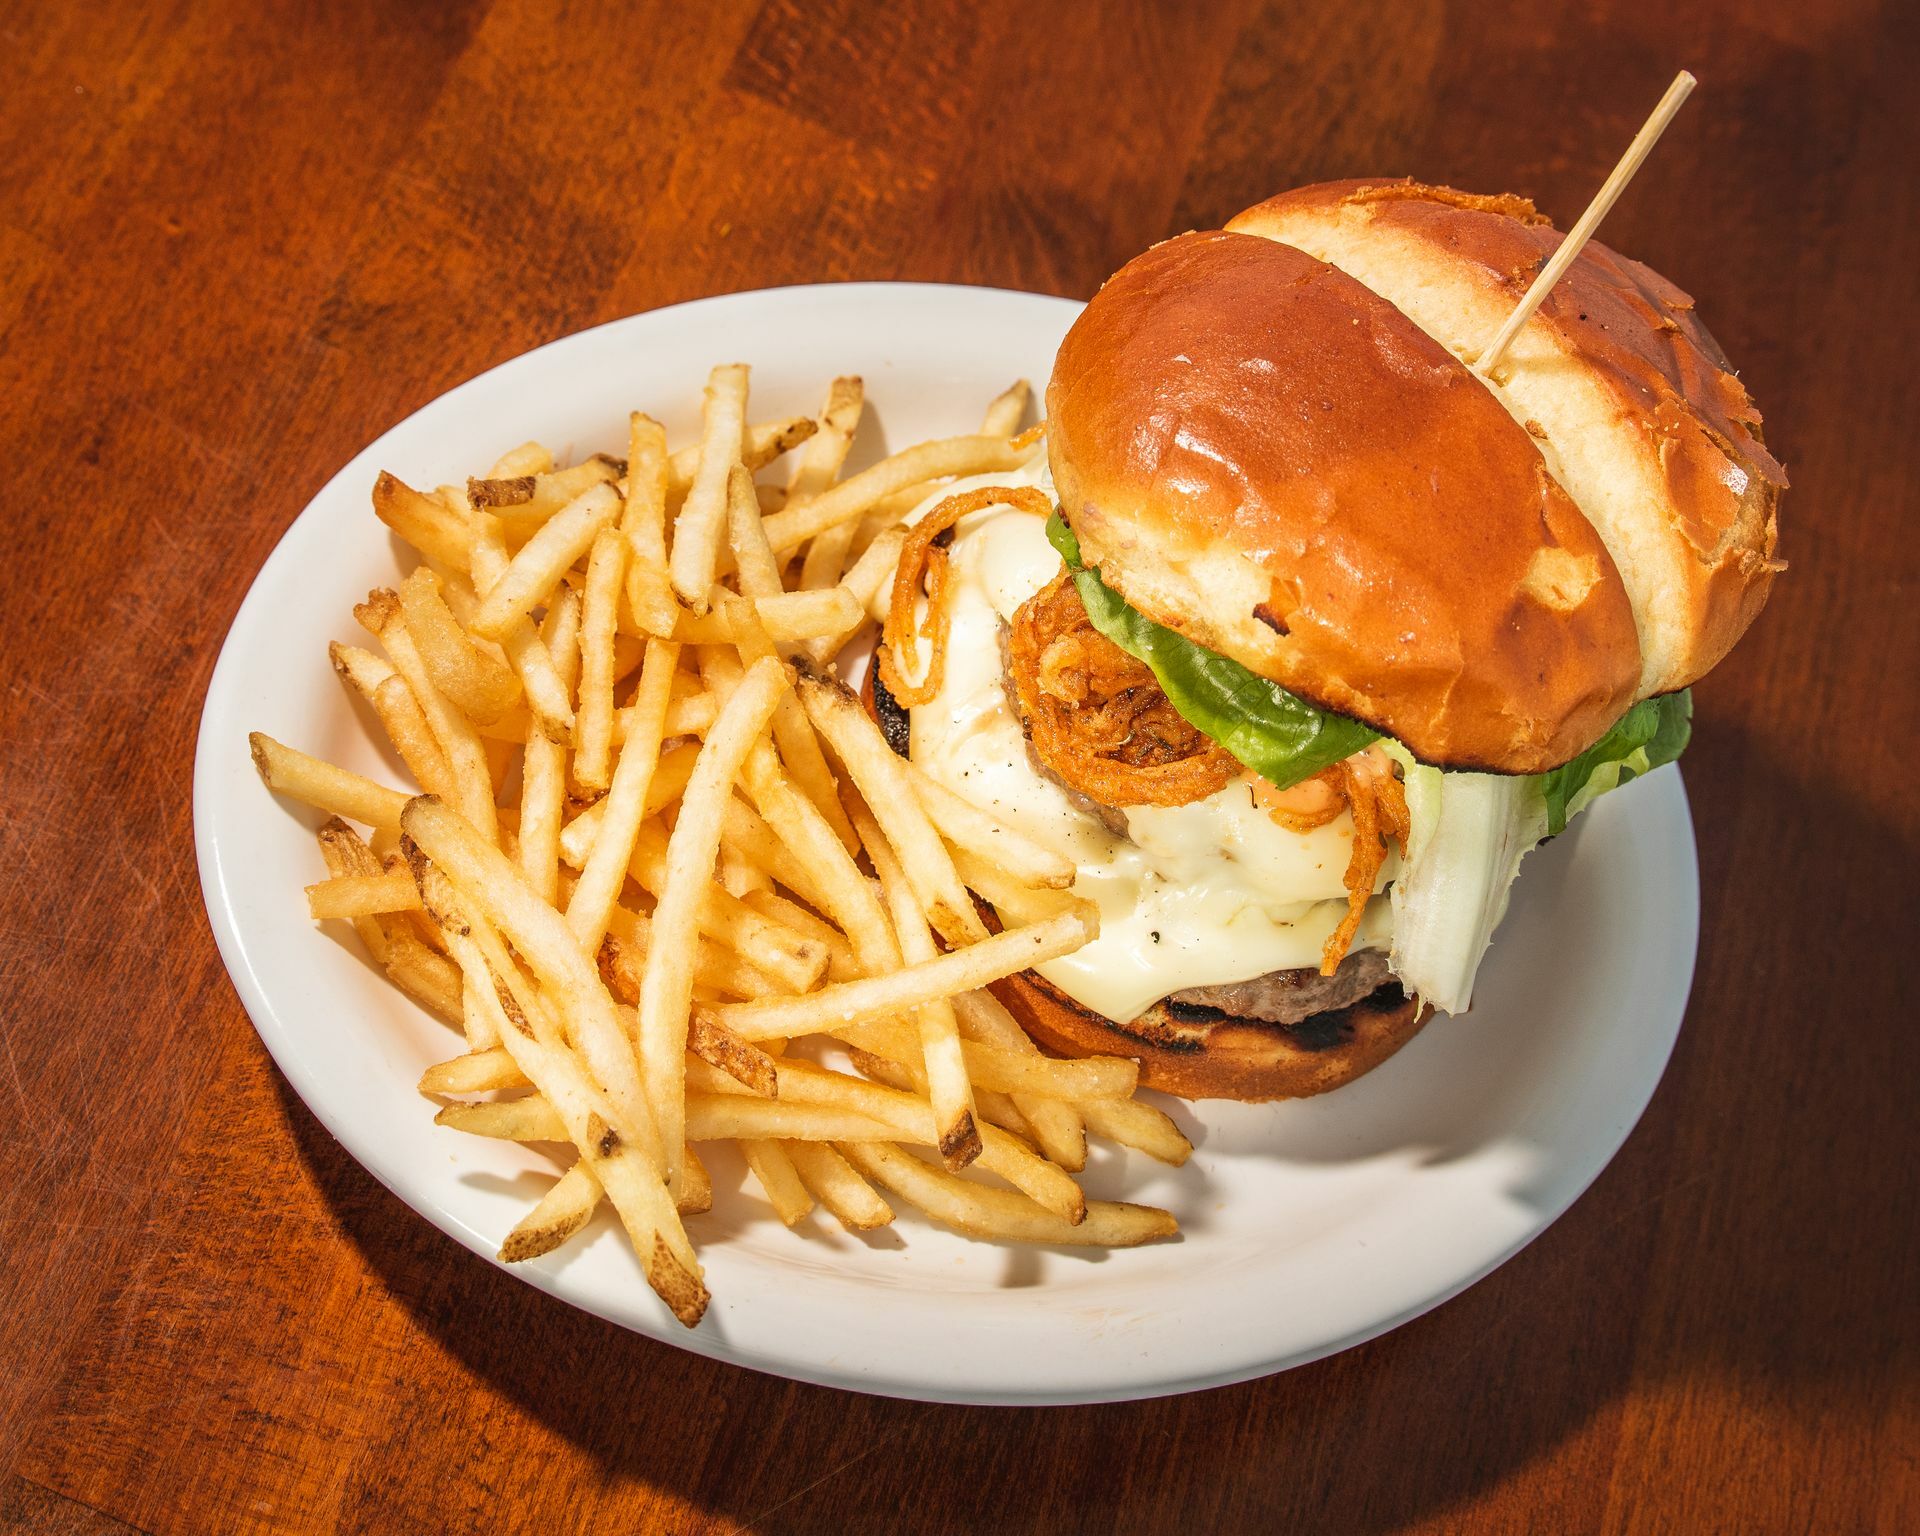 Burger and fries are available on the happy hour menu at Manna at Lobster Inn. ROBIN LEE